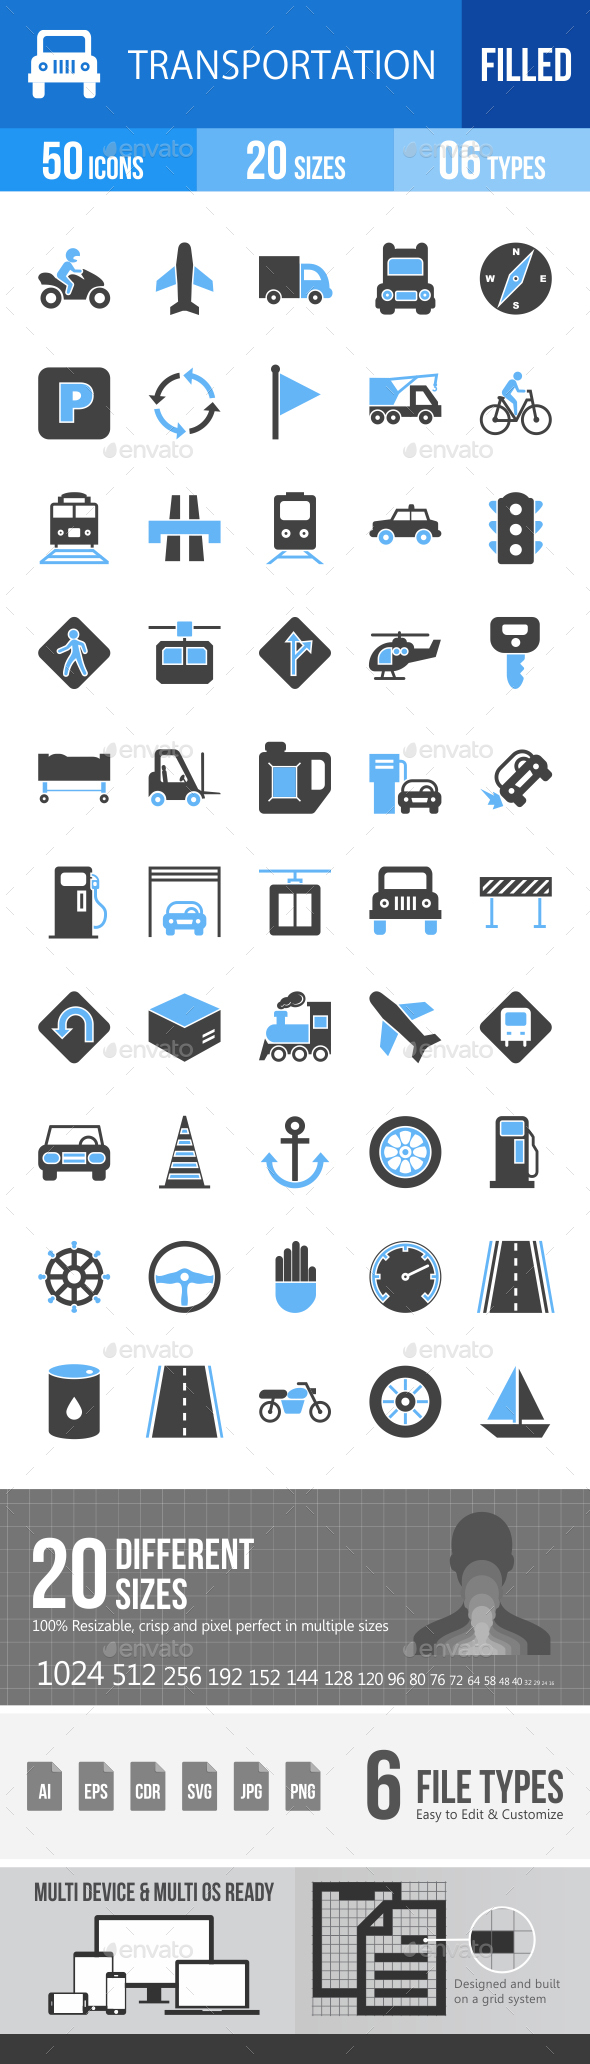 60 Banking Filled Blue & Black Icons